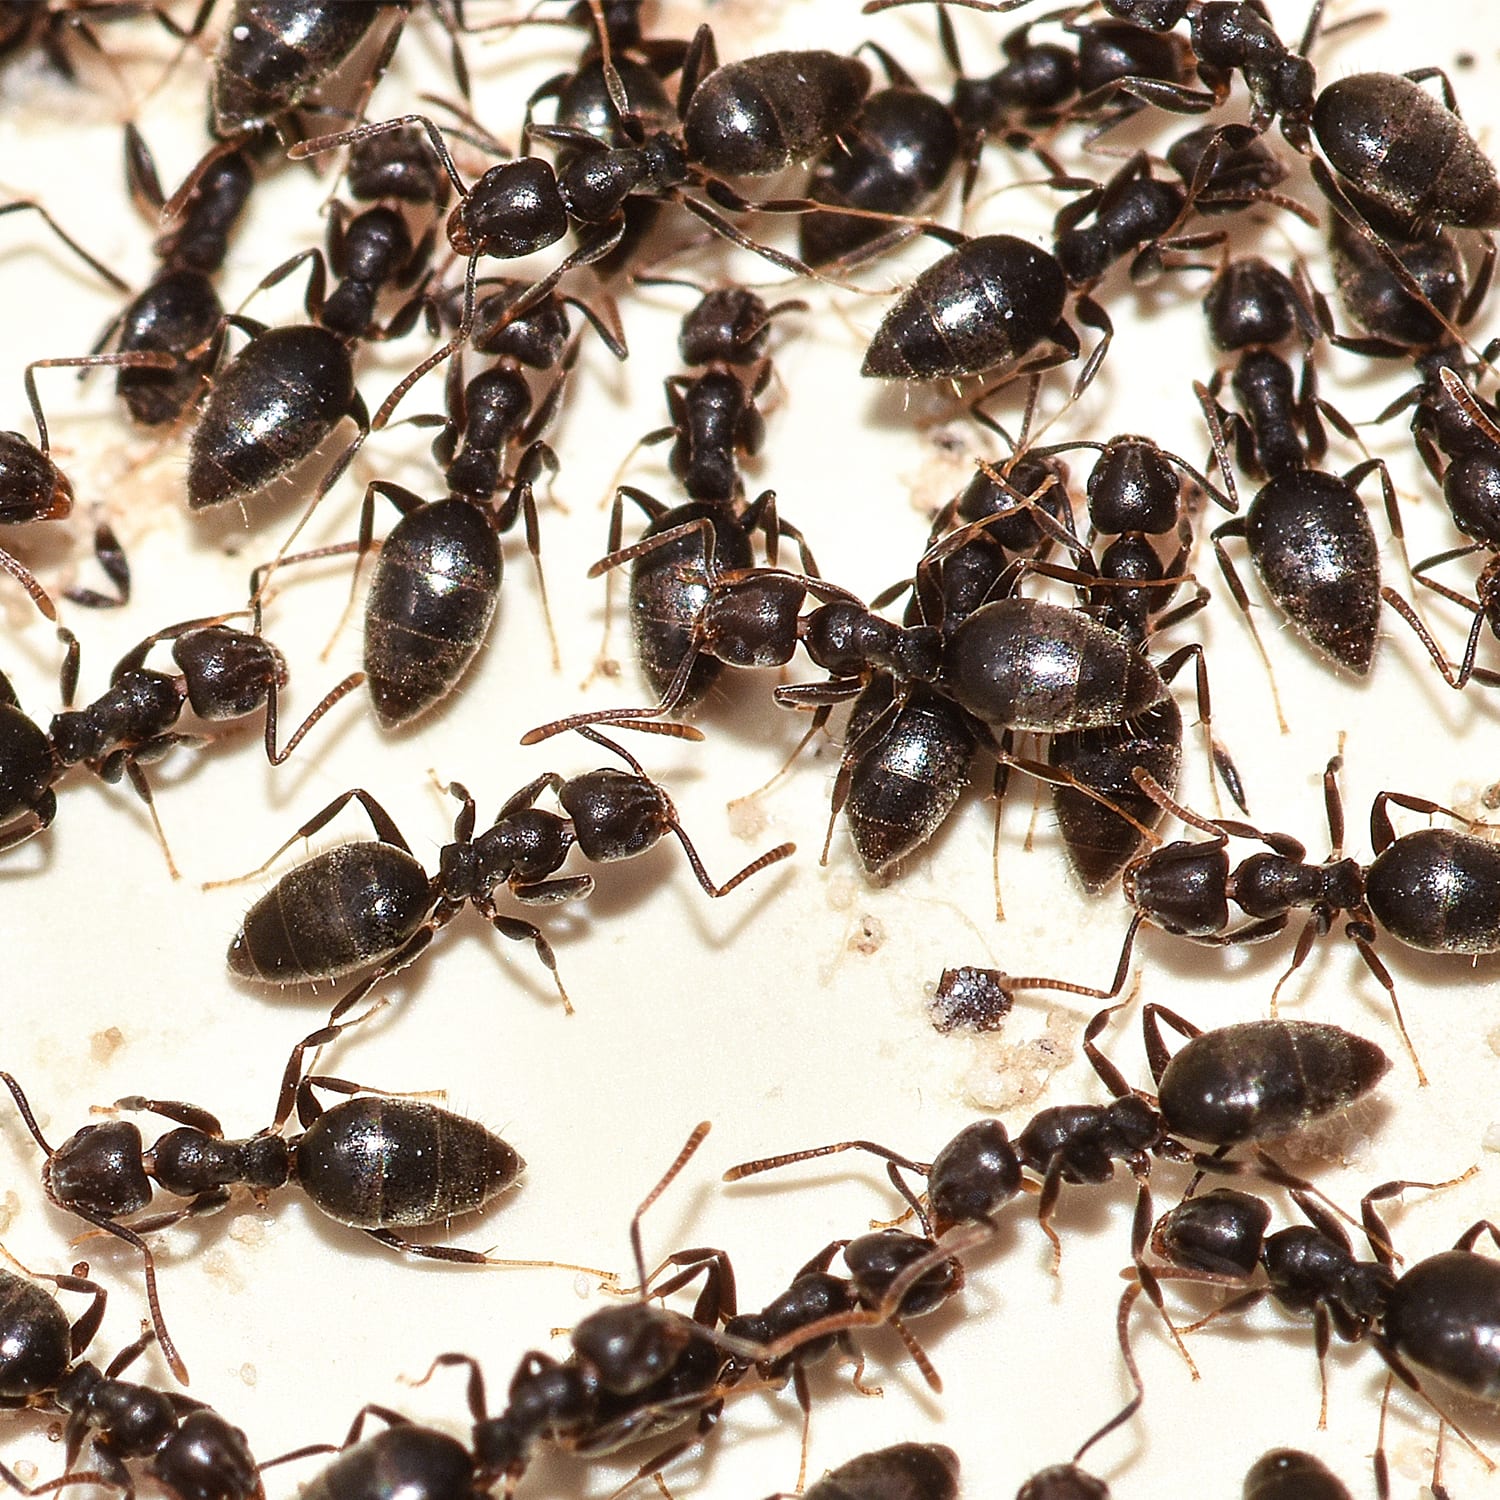 The White Footed Ant Colony